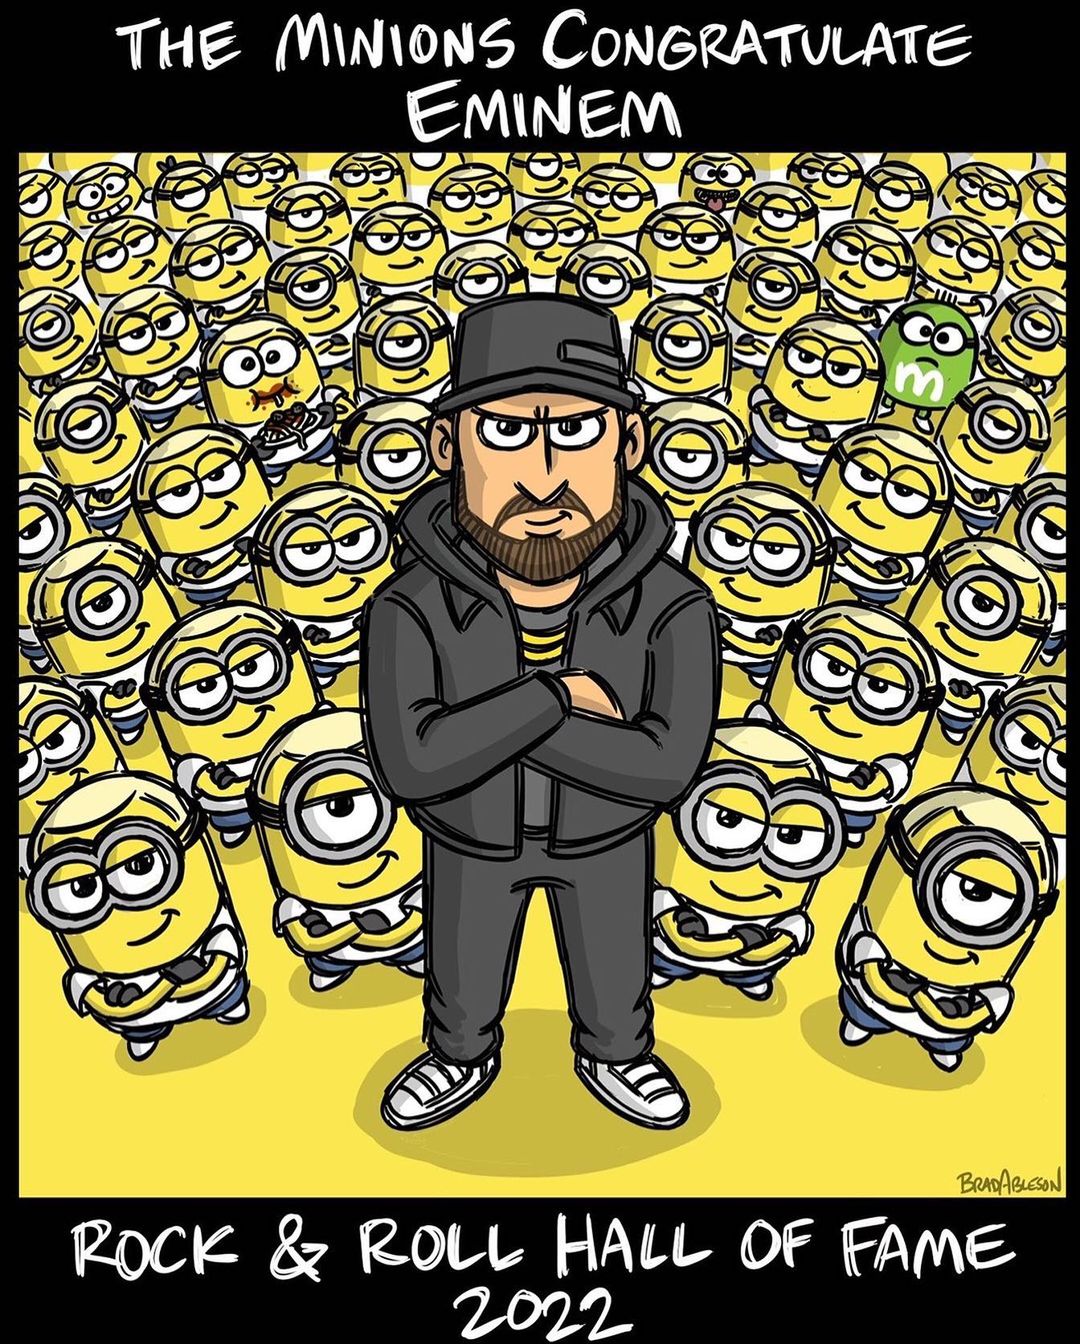 @minions got my back. Shout out to Gru and them…